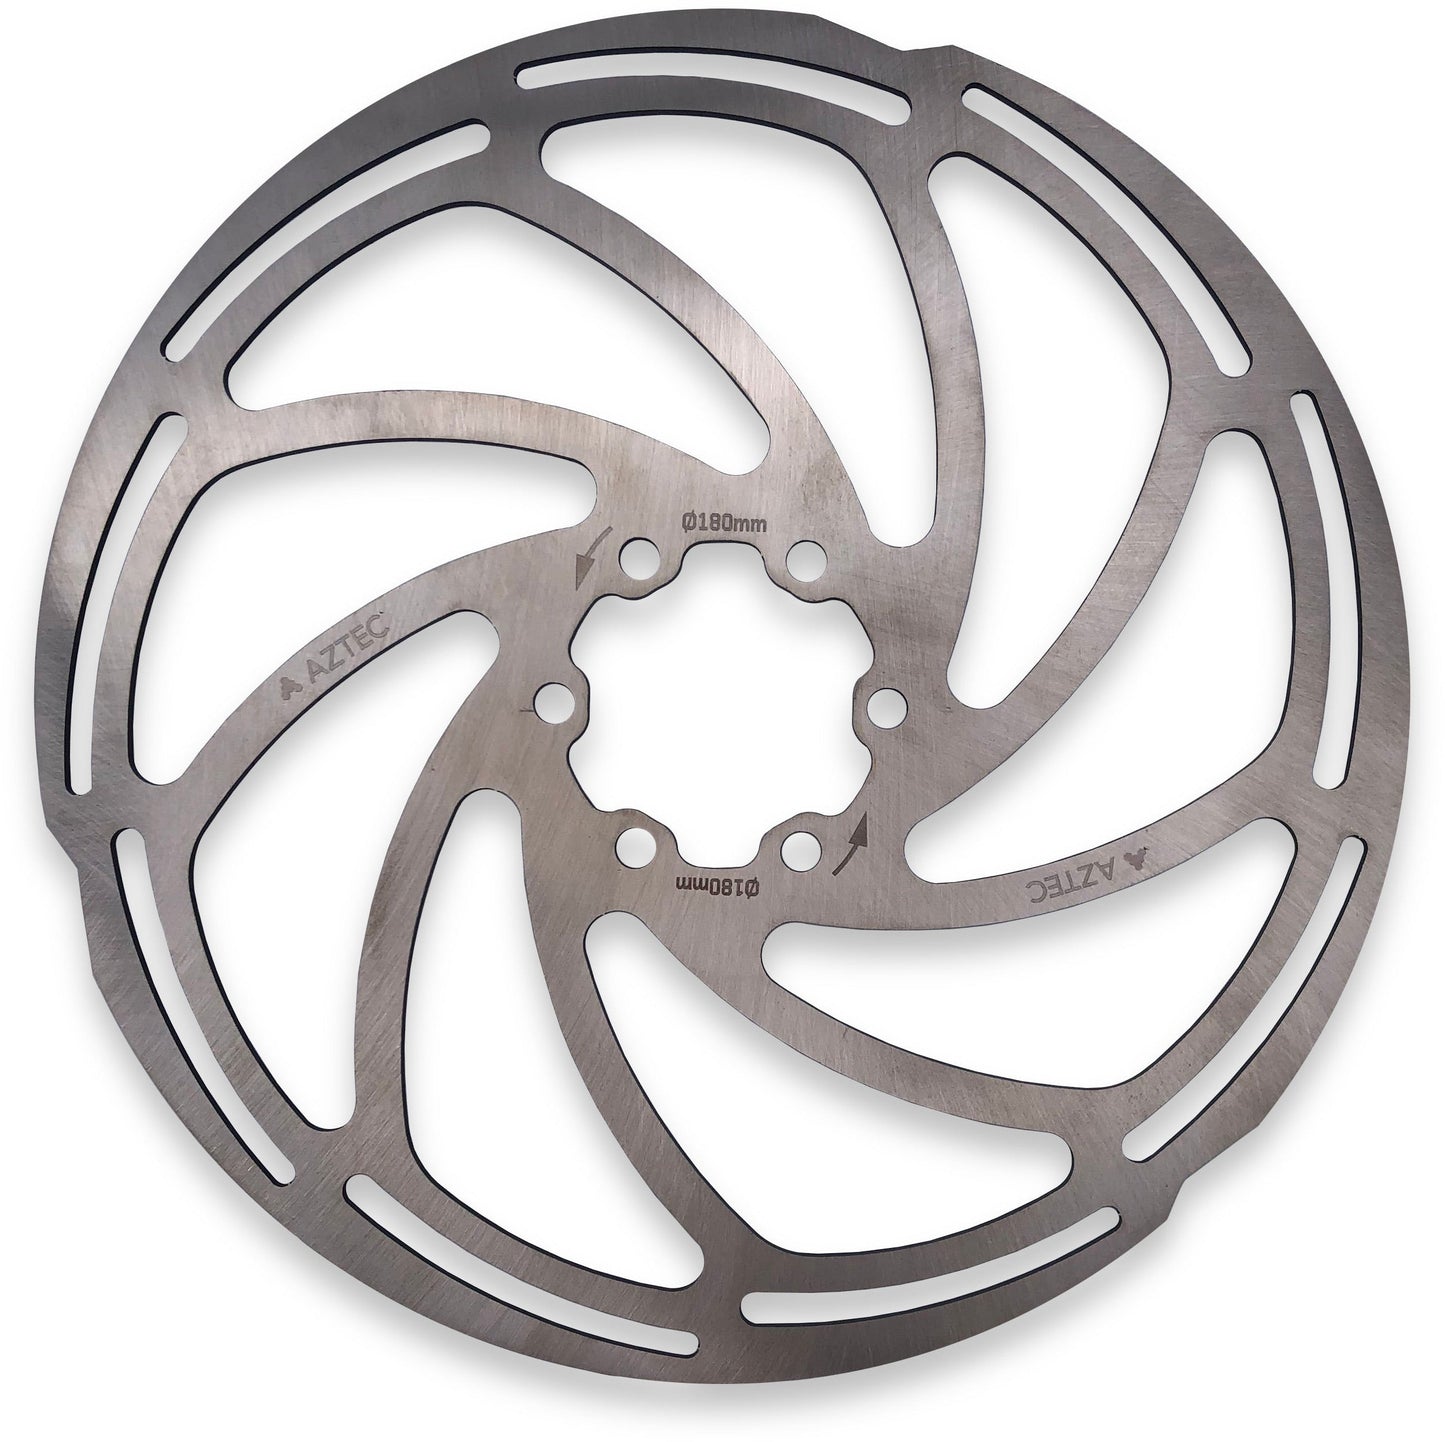 AZTEC FIXED STAINLESS STEEL 6 BOLT DISC ROTOR - 203MM